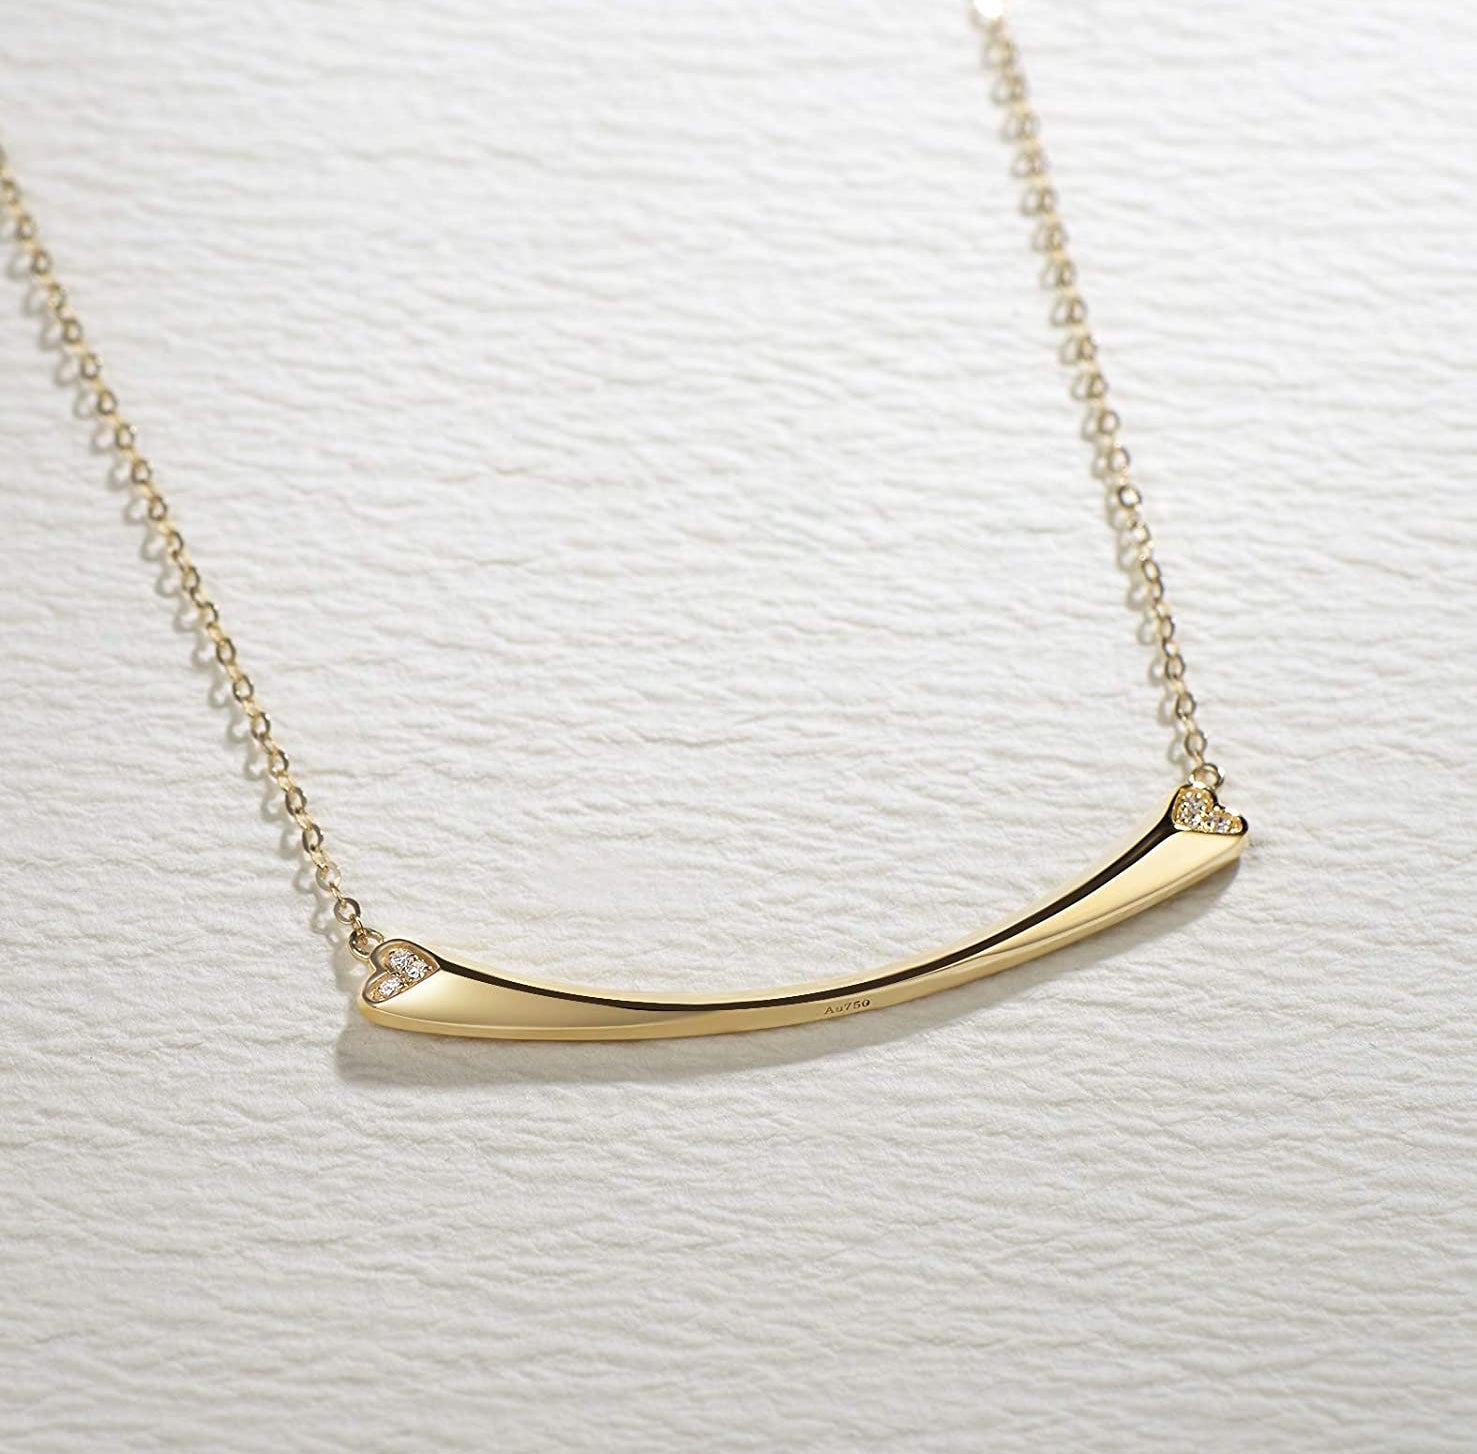 FANCIME "Hearty Smile" Bar 18K Real Solid Gold Necklace Detail